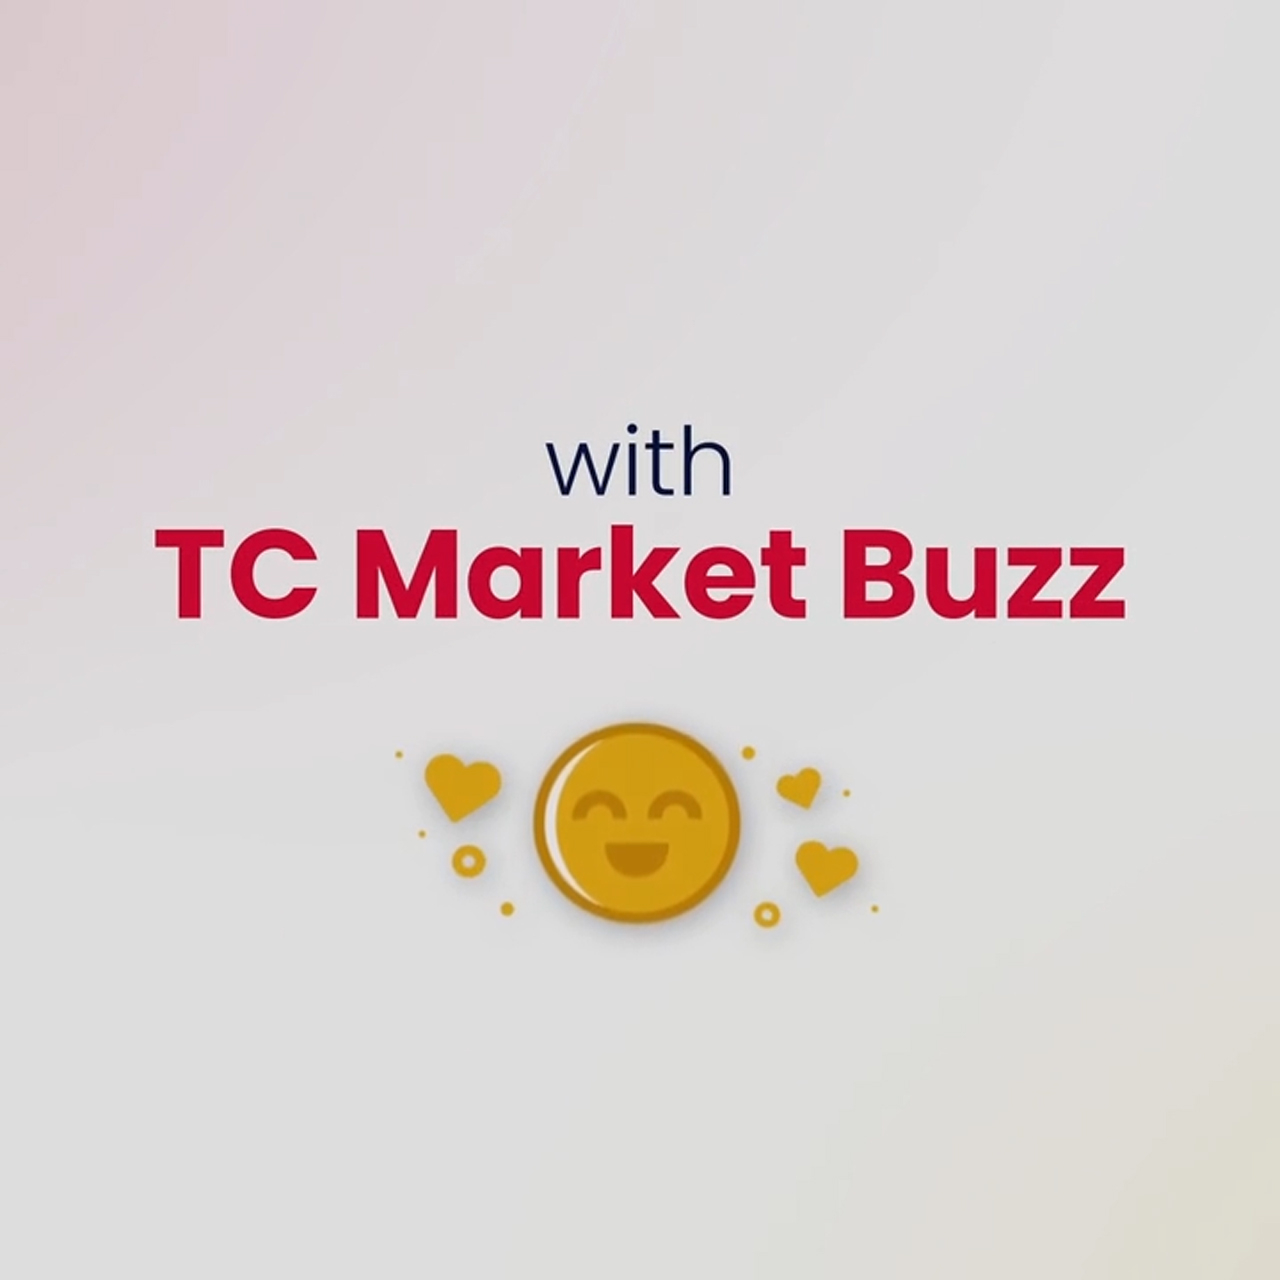 TC Market Buzz helps investors & active traders tackle infobesity while improving a brokerage platforms' returns on news investment.